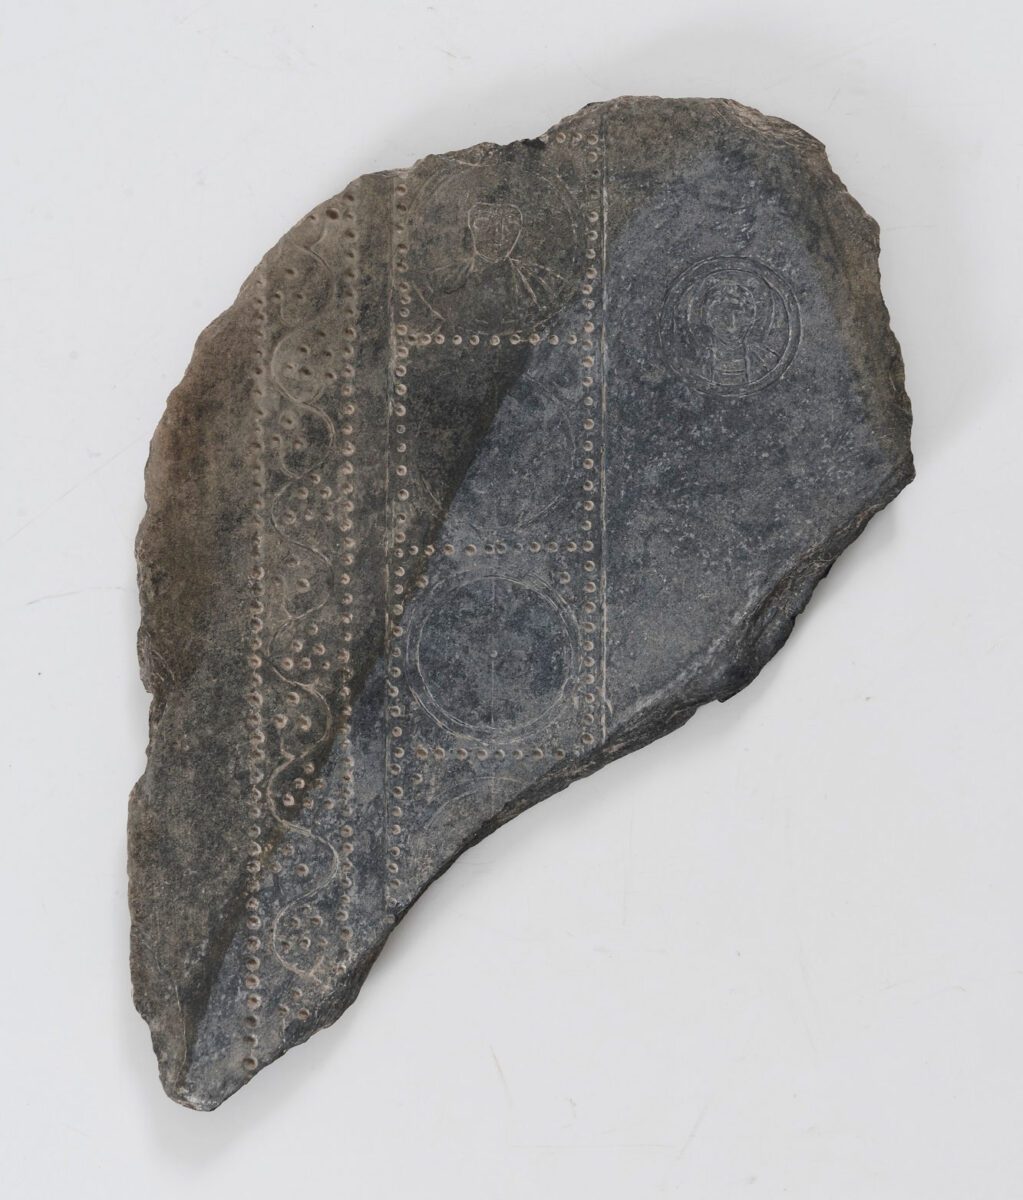 Unfinished schist slab, 5th–6th c. AD. The slab was accidentally found by Georgios Sotiriou in the archaeological site of medieval Ephesus (Ayasoluk)
Byzantine and Christian Museum, ΒΧΜ 2911.
